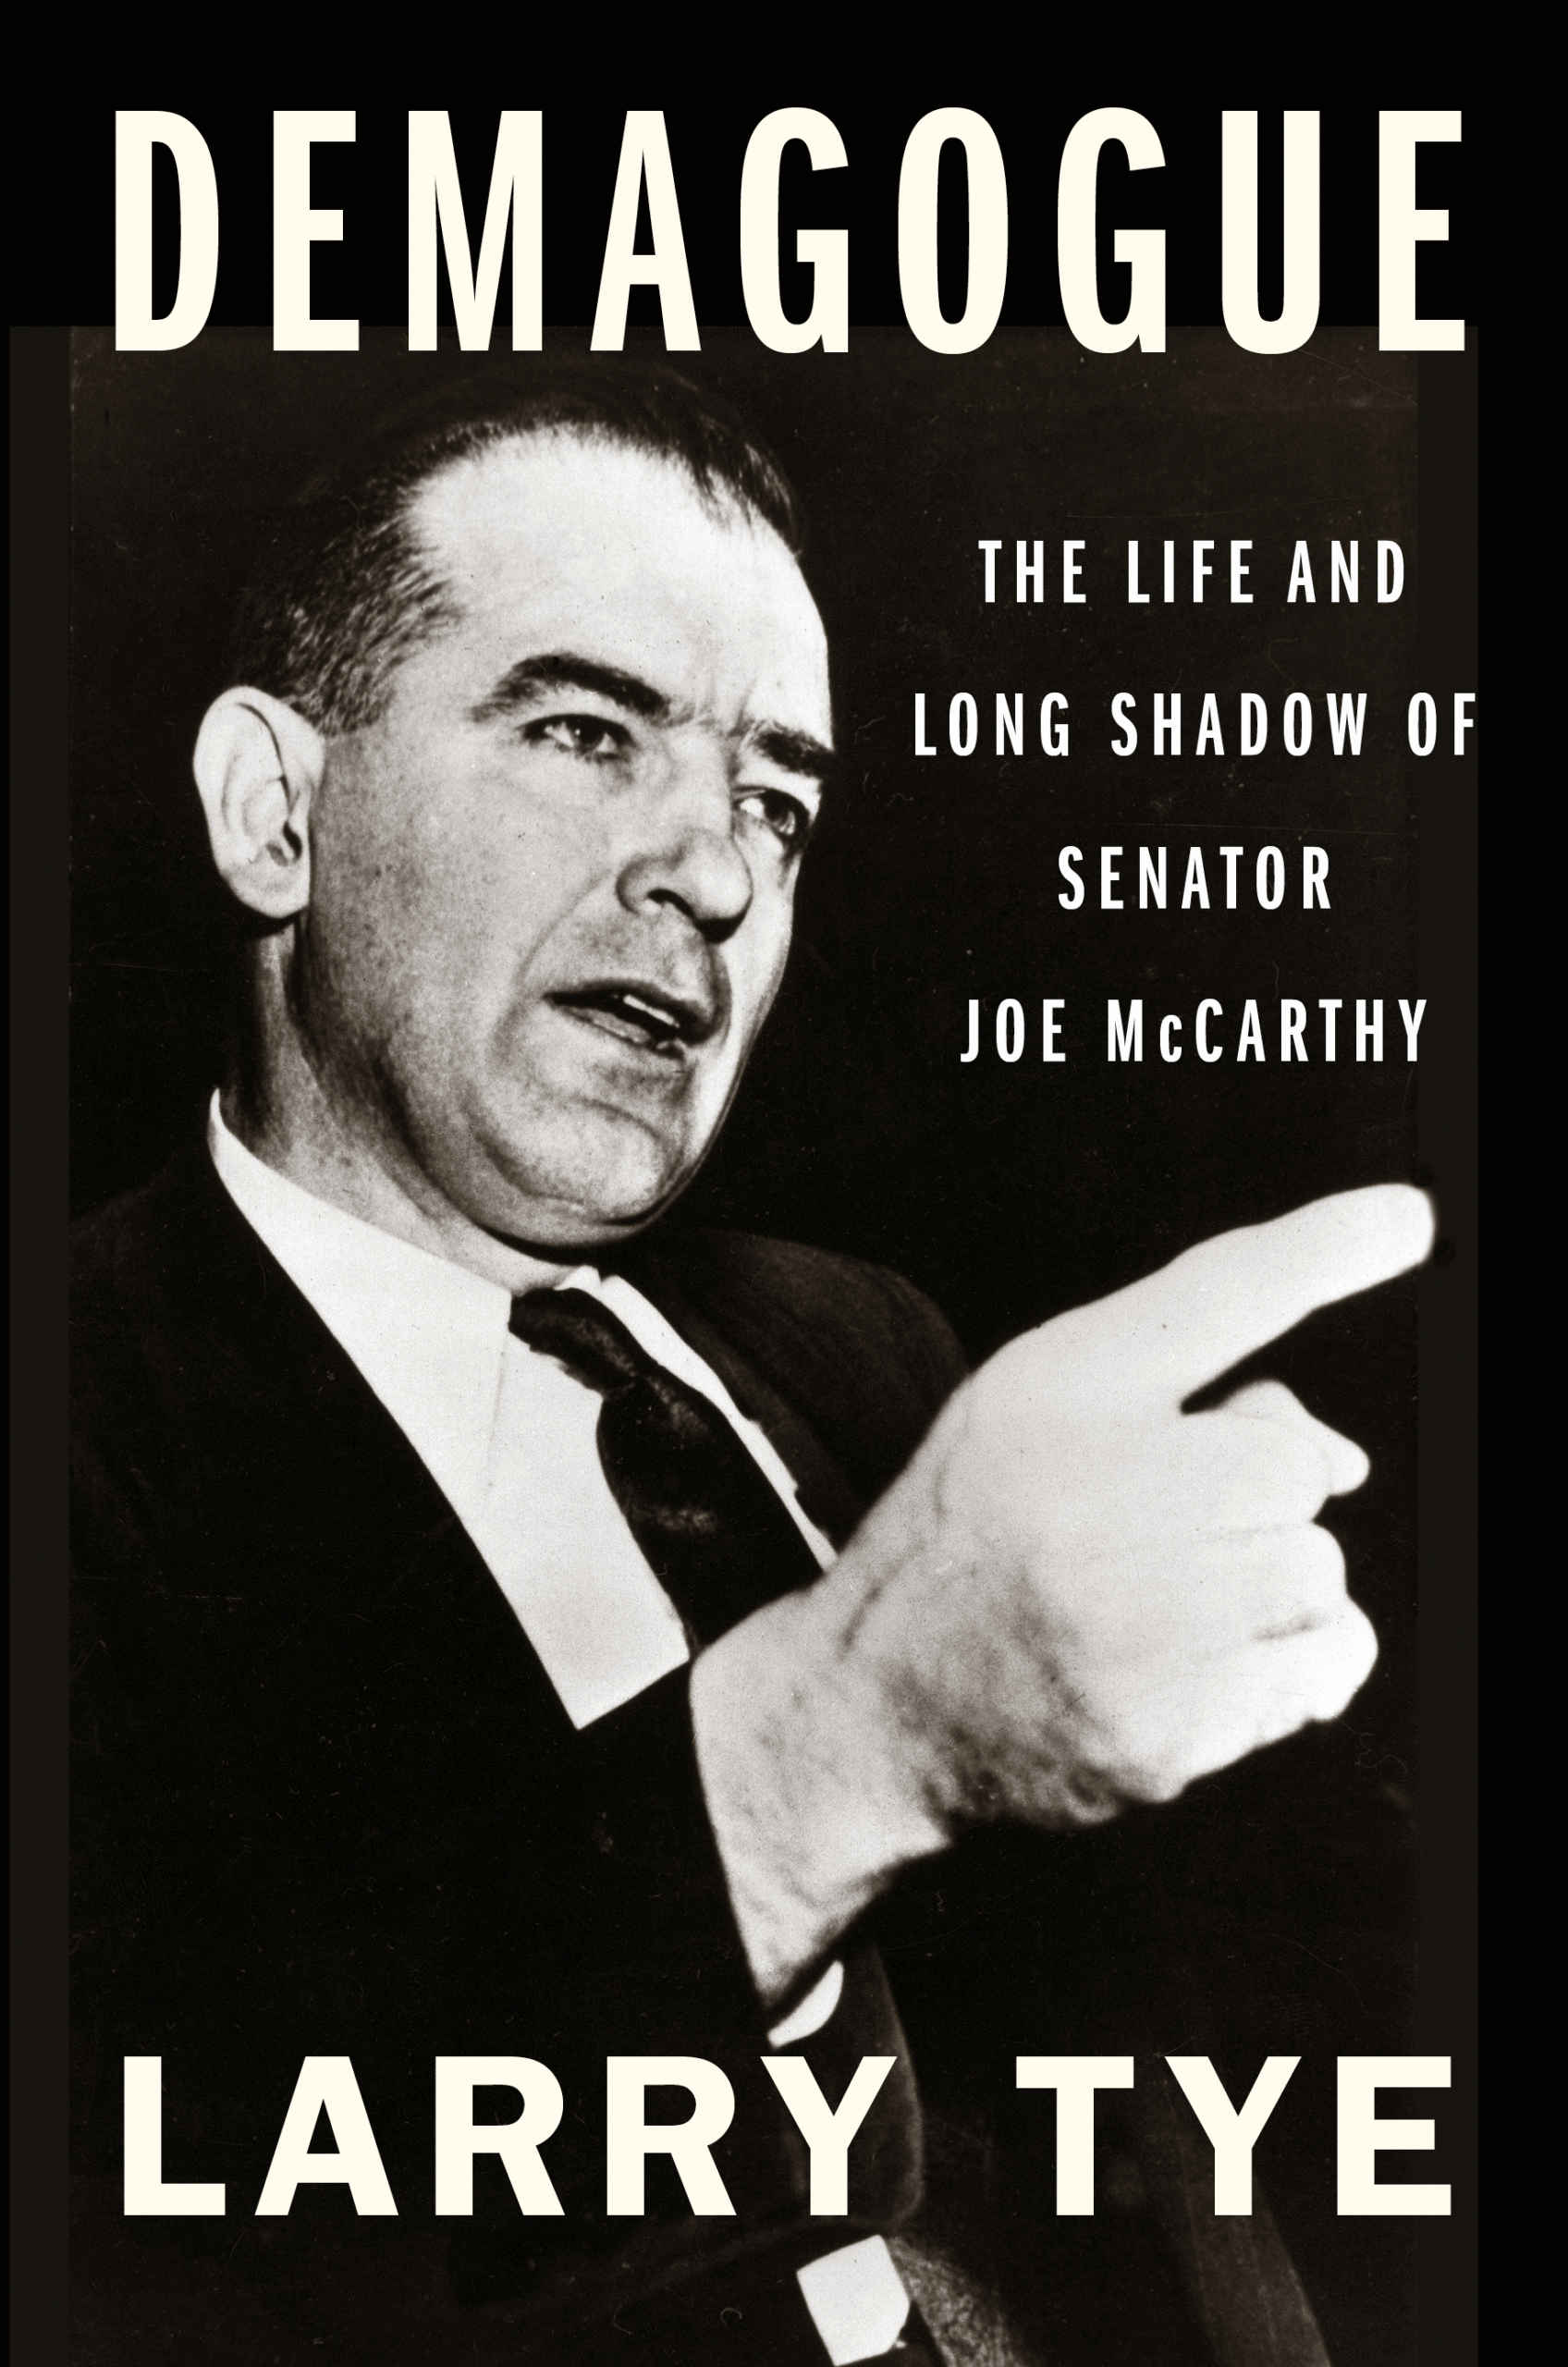 #1555: Demagogue – The Life Of Senator Joe McCarthy | The Best Of Our Knowledge